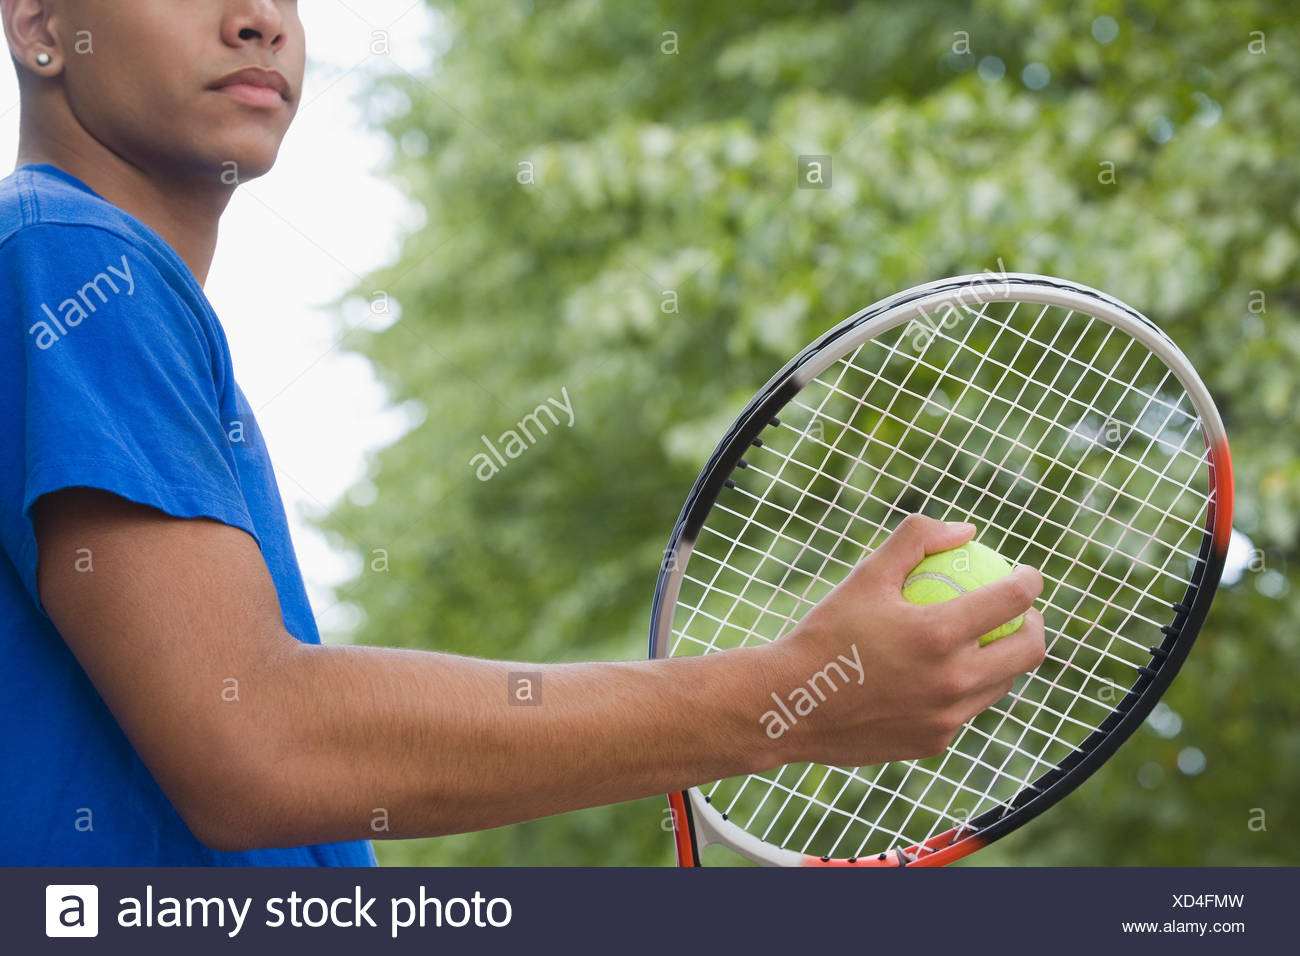 Mid Section View Of A Teenage Boy Holding A Tennis Racket And A Tennis Ball Stock Photo Alamy